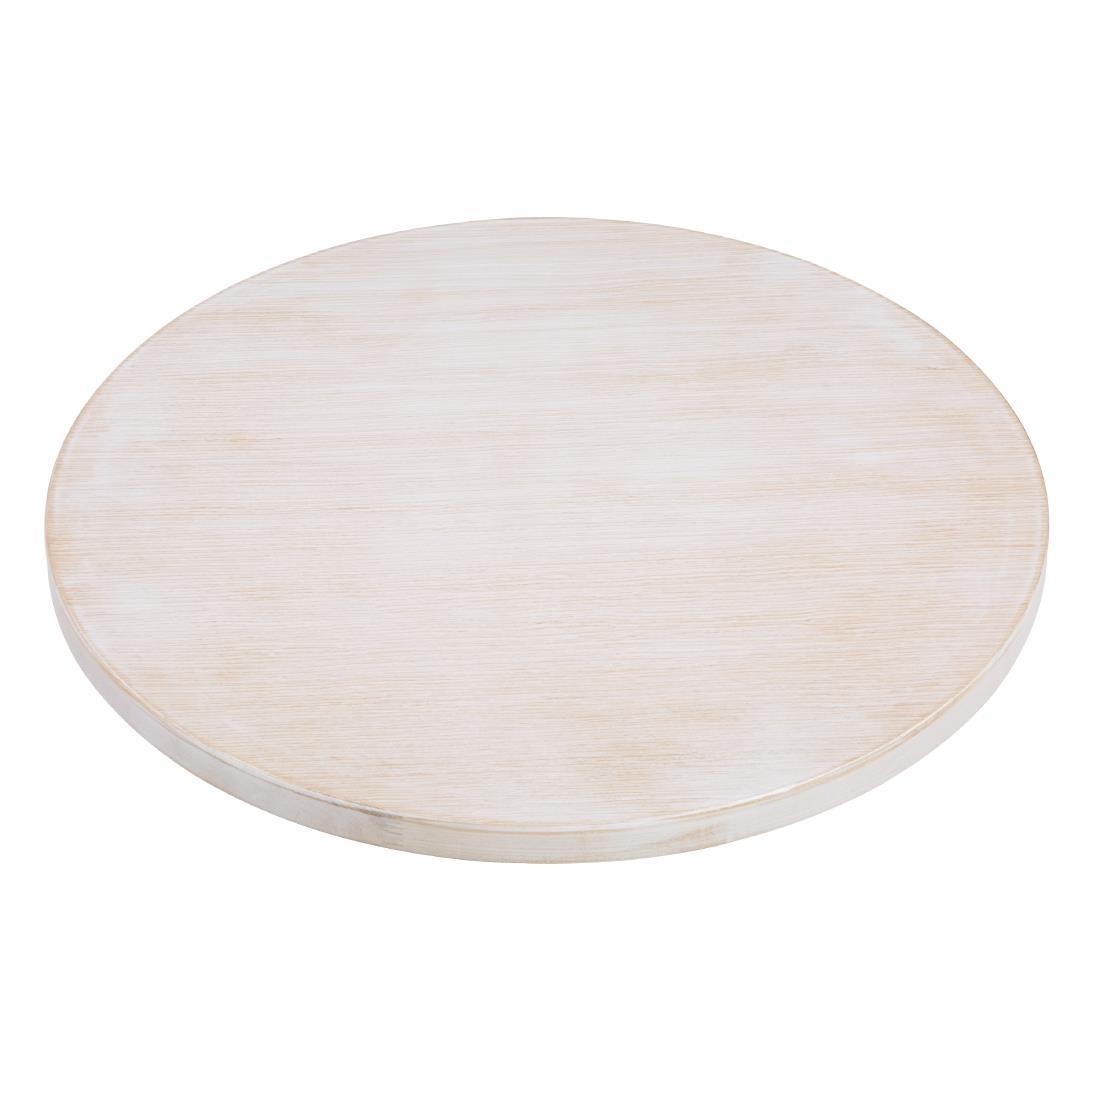 Bolero Pre-drilled Round Table Top Vintage White 600mm - DY729  - 2